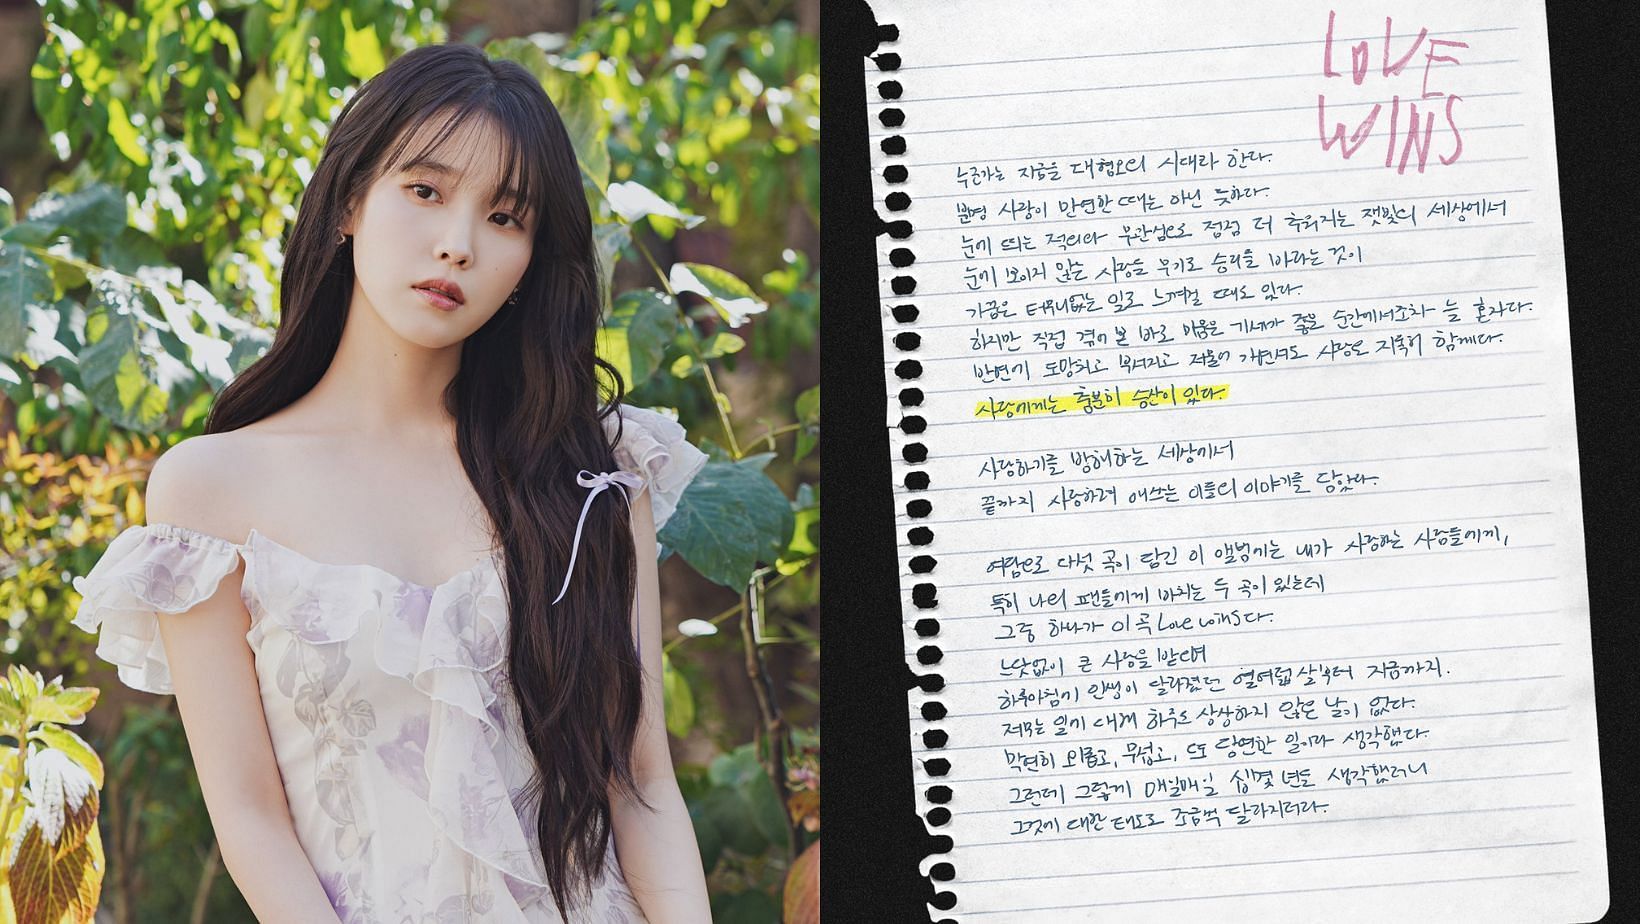 IU&rsquo;s handwritten track intro giving fans a glimpse on 